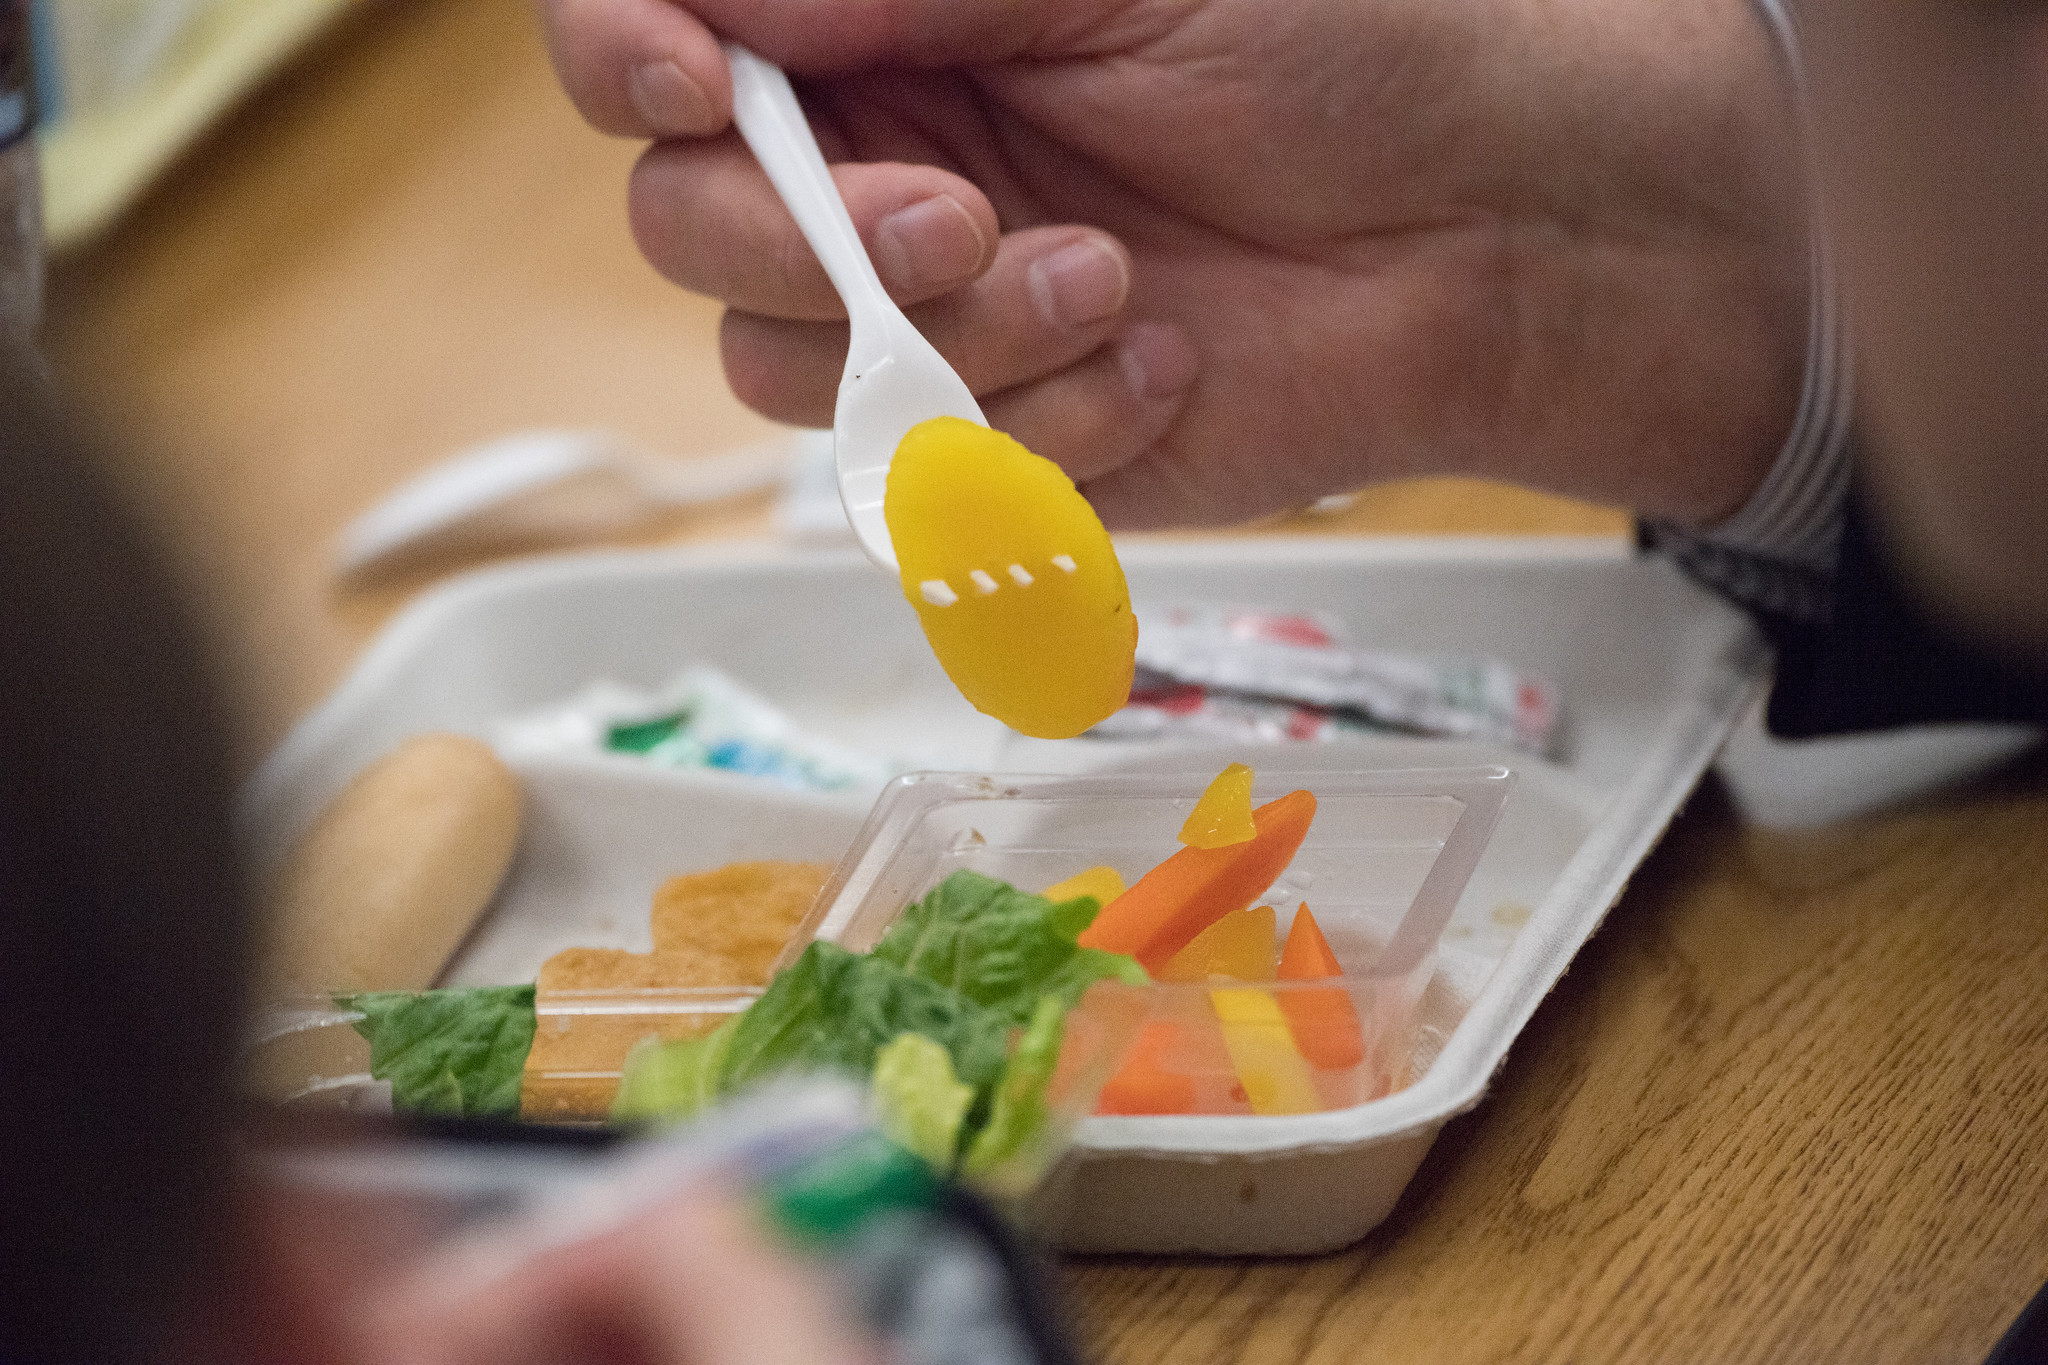 A hand holding a plastic spork with a piece of yellow pepper, from a pre-packaged meal